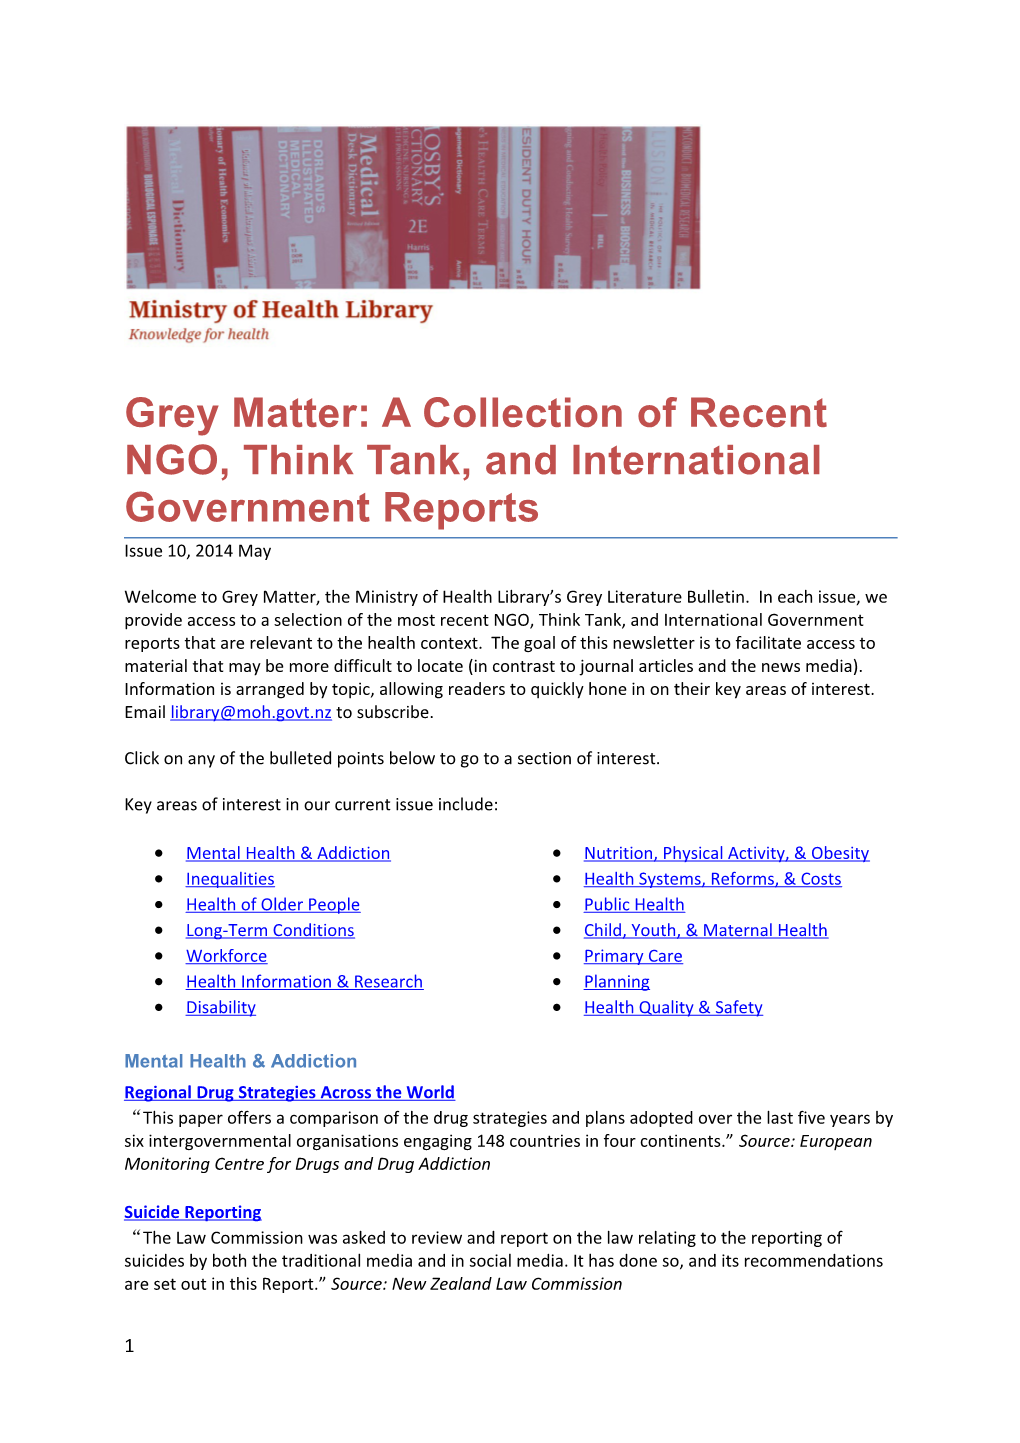 Grey Matter, Issue 7, February 2014 s1